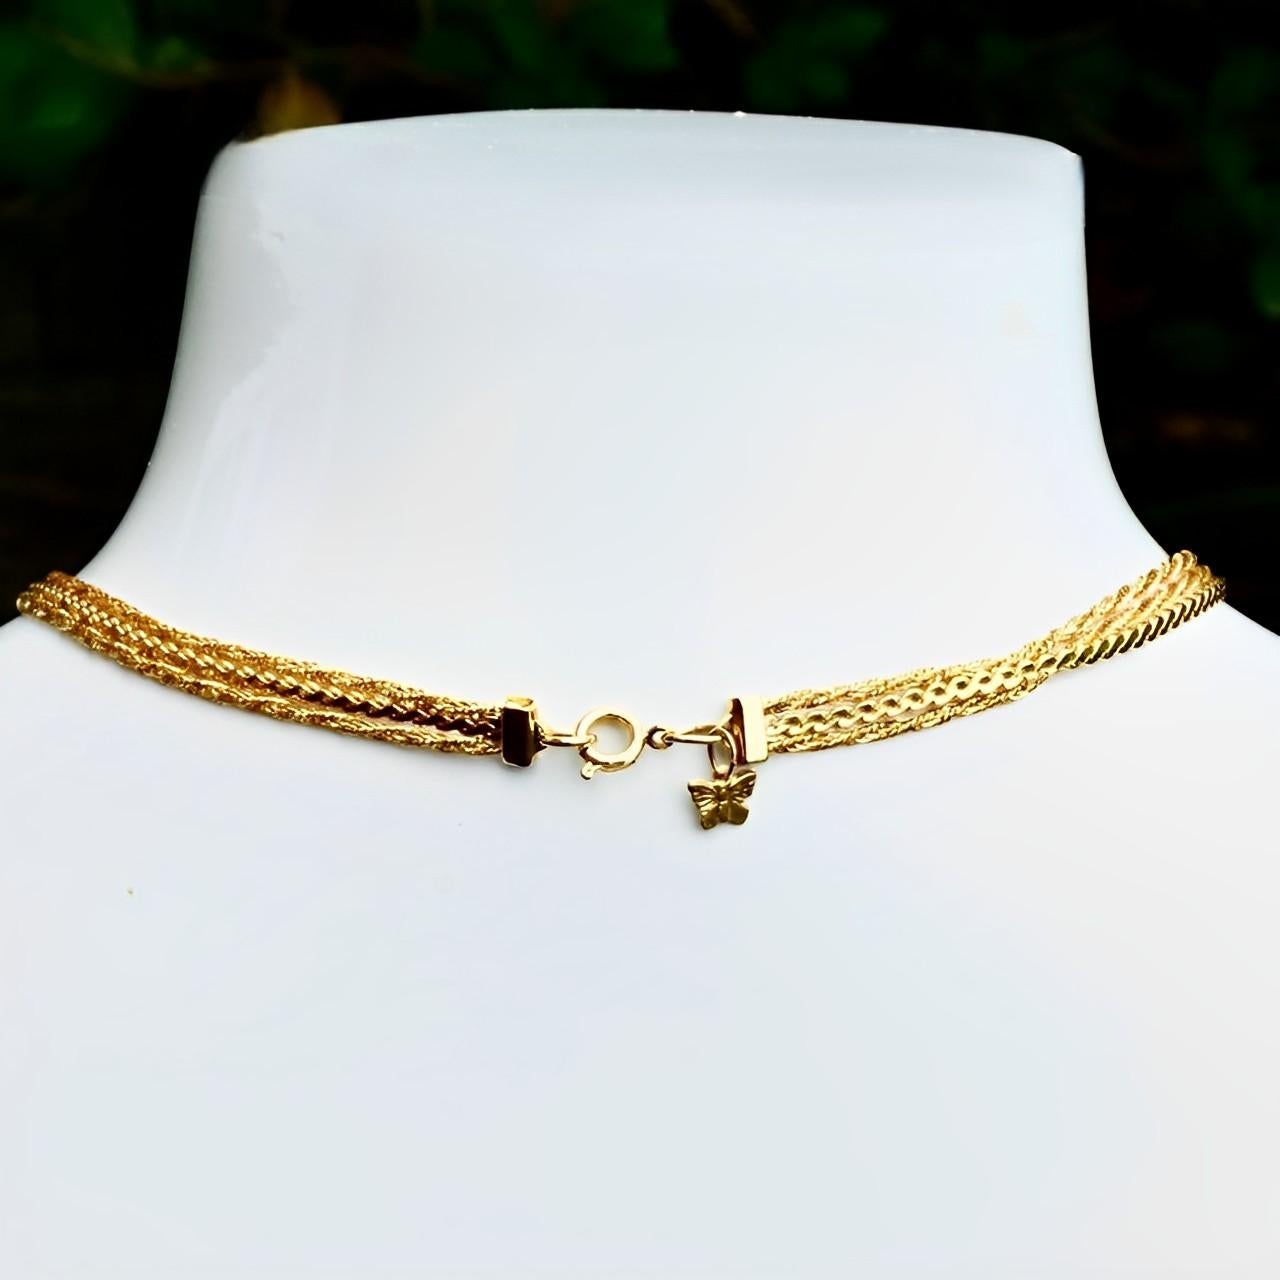 Michelle René Gold Plated Three Strand Rope and Serpentine Necklace circa 1980s For Sale 1